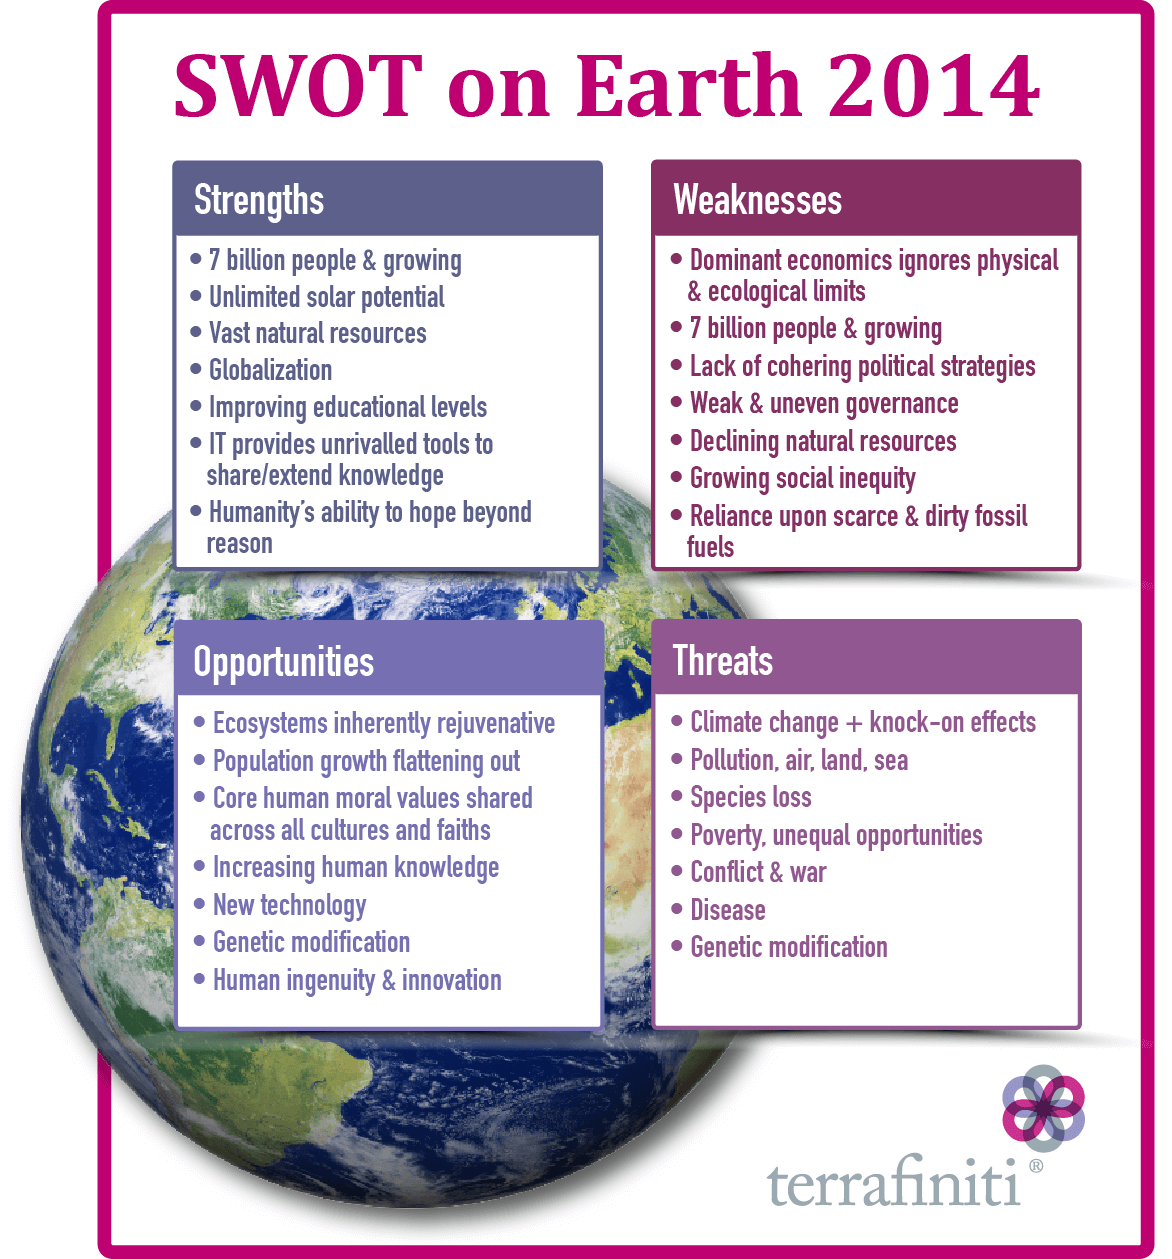 SWOT on Earth's going on?